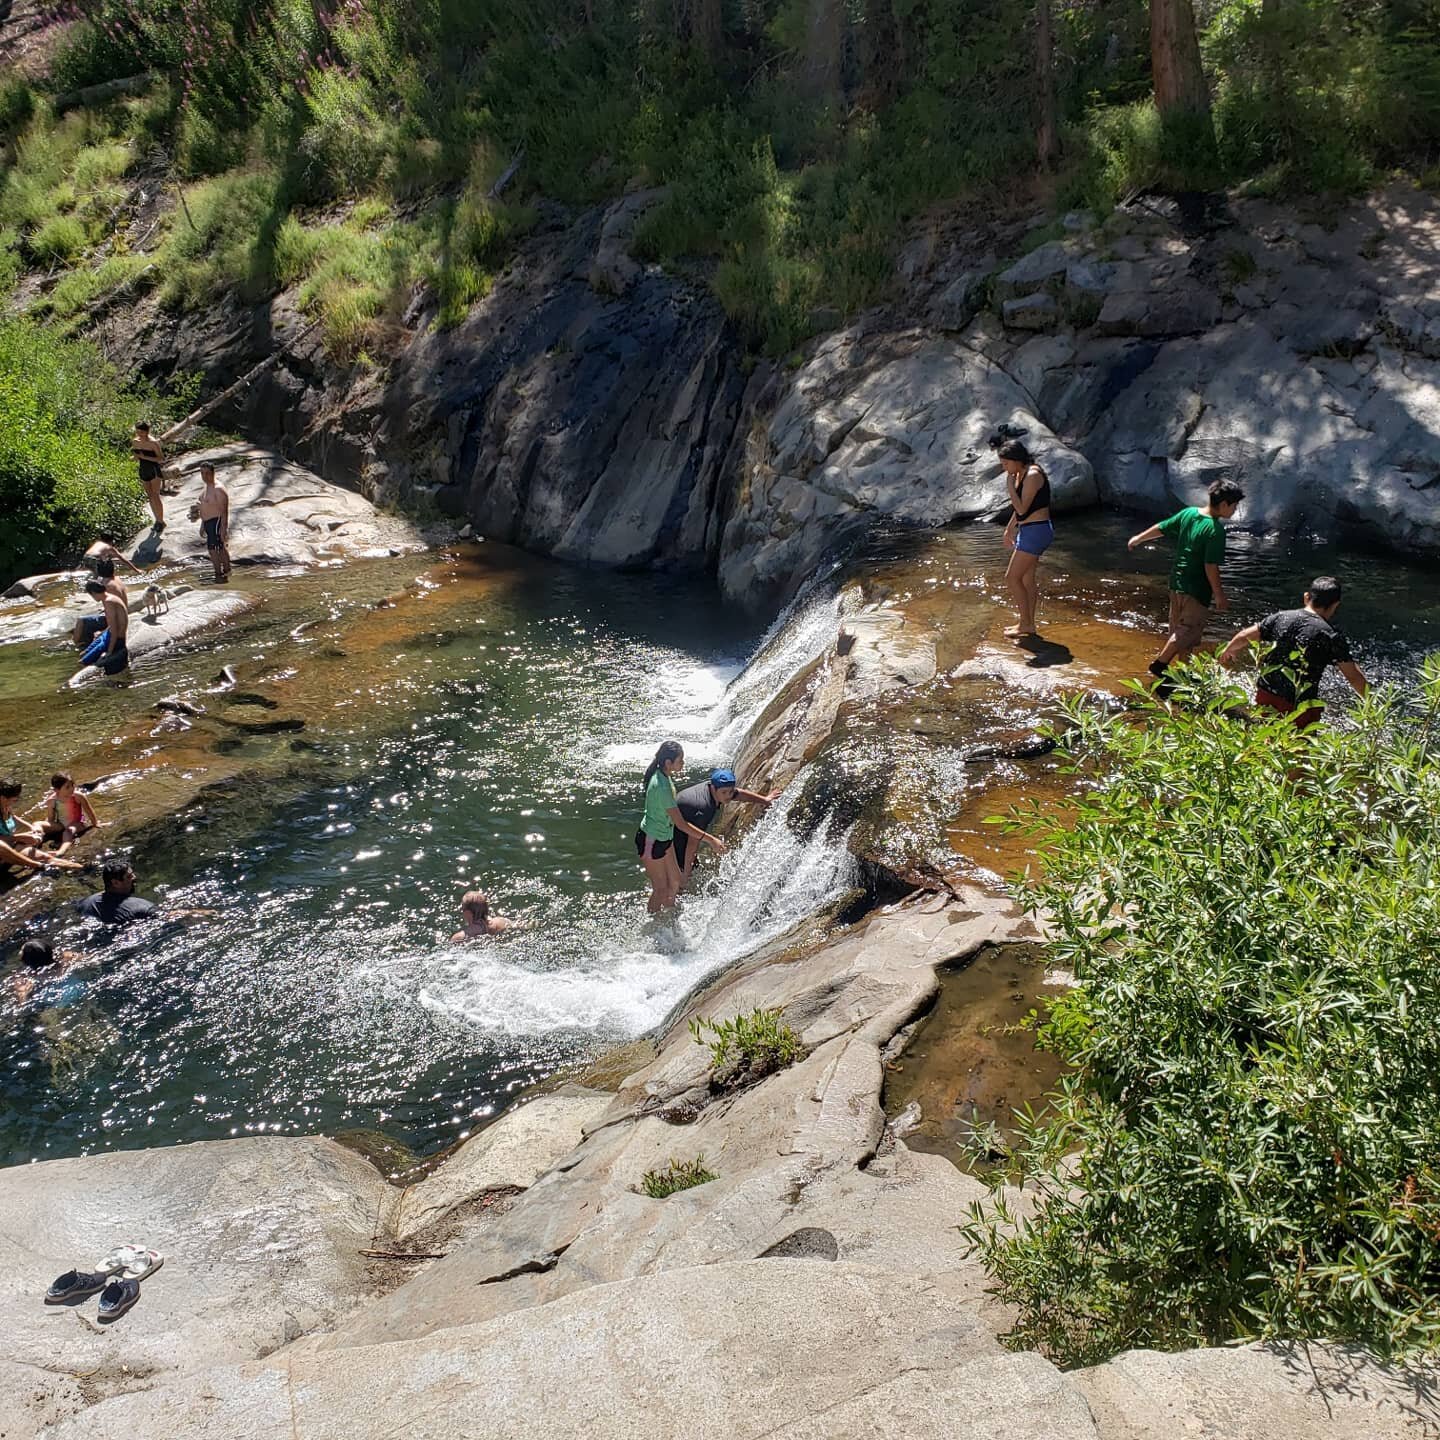 Love this place! ❤ One of our favorite places to cool off in the high country.